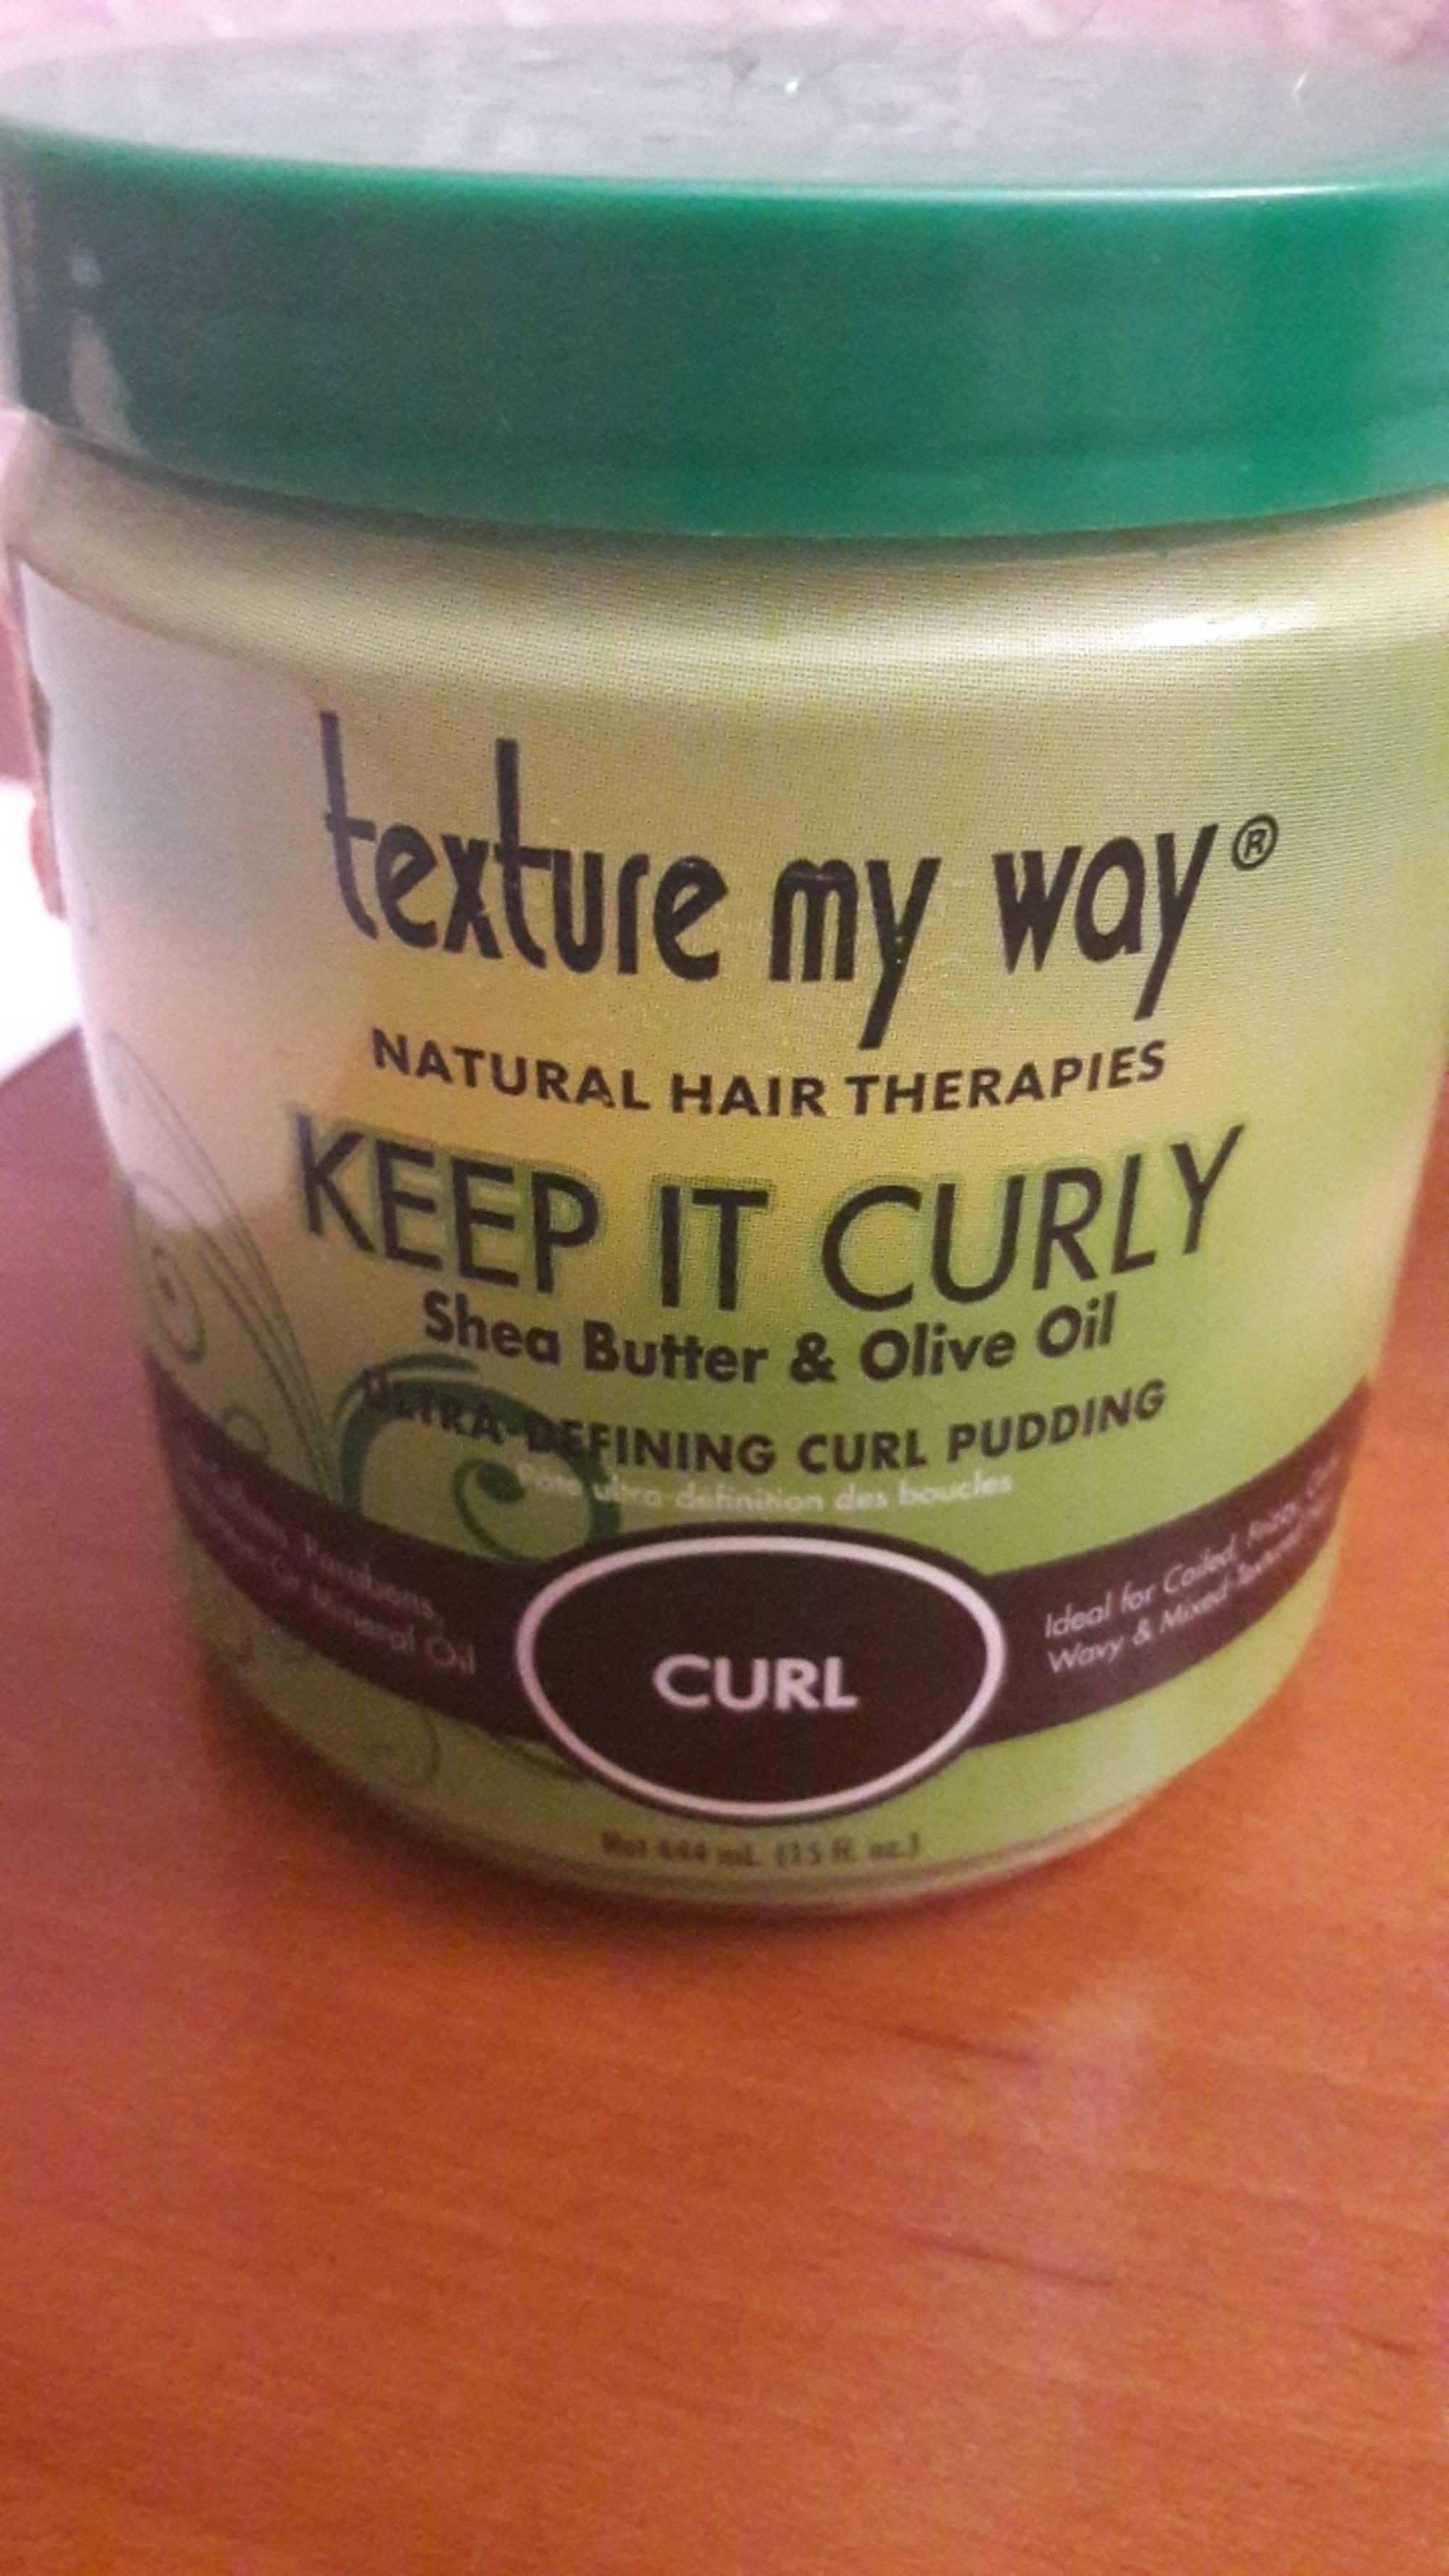 TEXTURE MY WAY - Keep it curly shea butter & olive oil